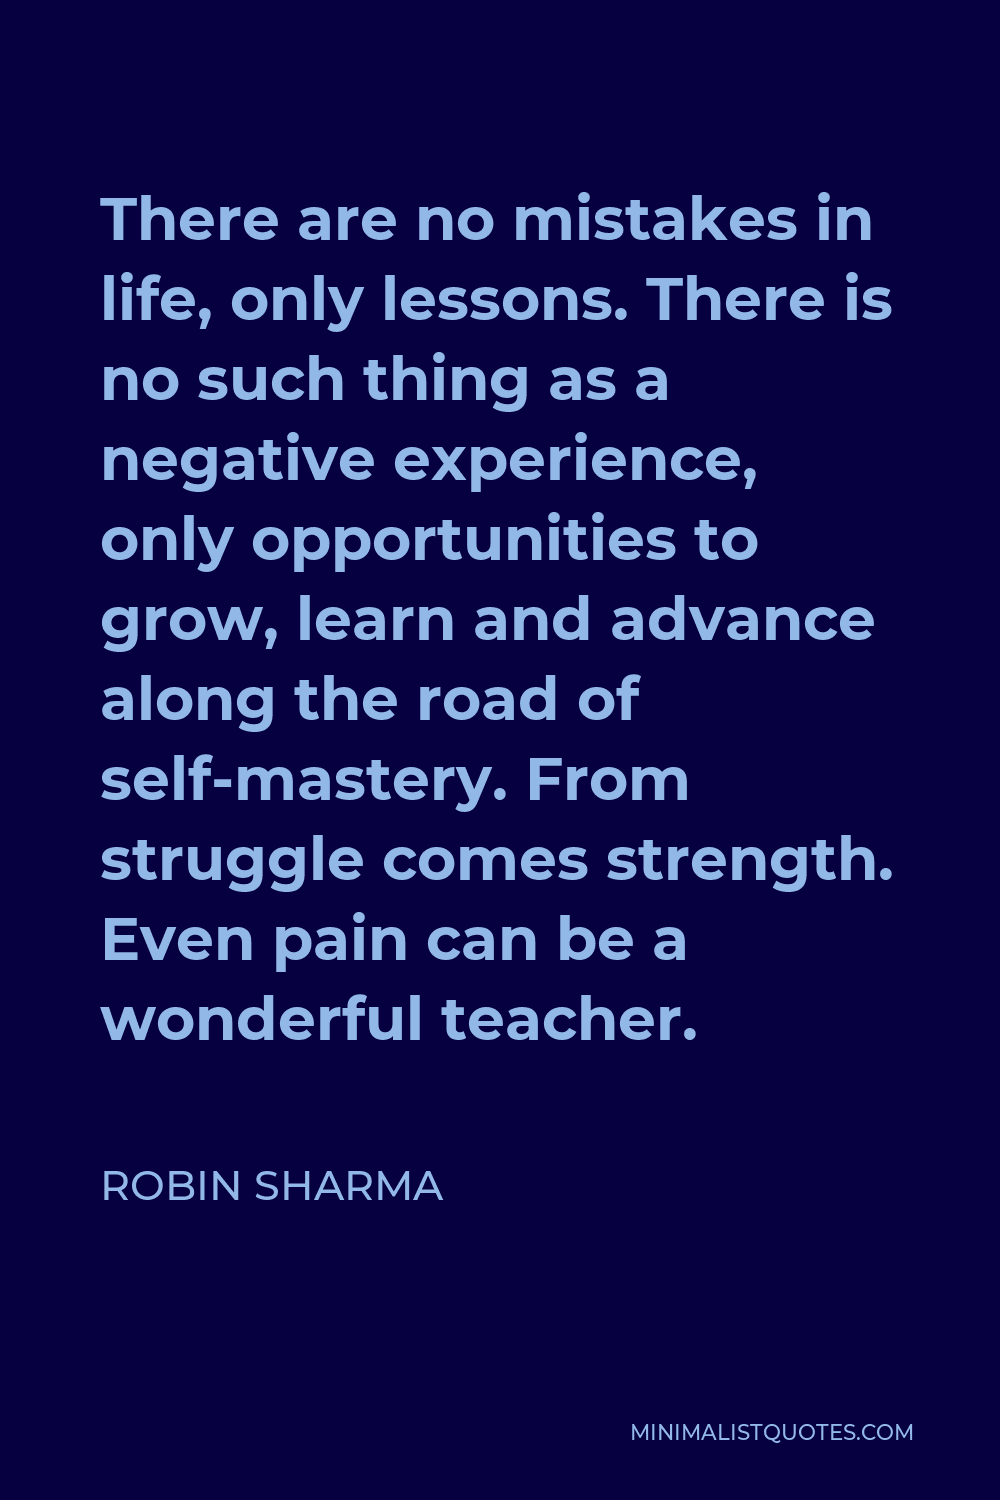 Robin Sharma Quote - There are no mistakes in life, only lessons. There is no such thing as a negative experience, only opportunities to grow, learn and advance along the road of self-mastery. From struggle comes strength. Even pain can be a wonderful teacher.